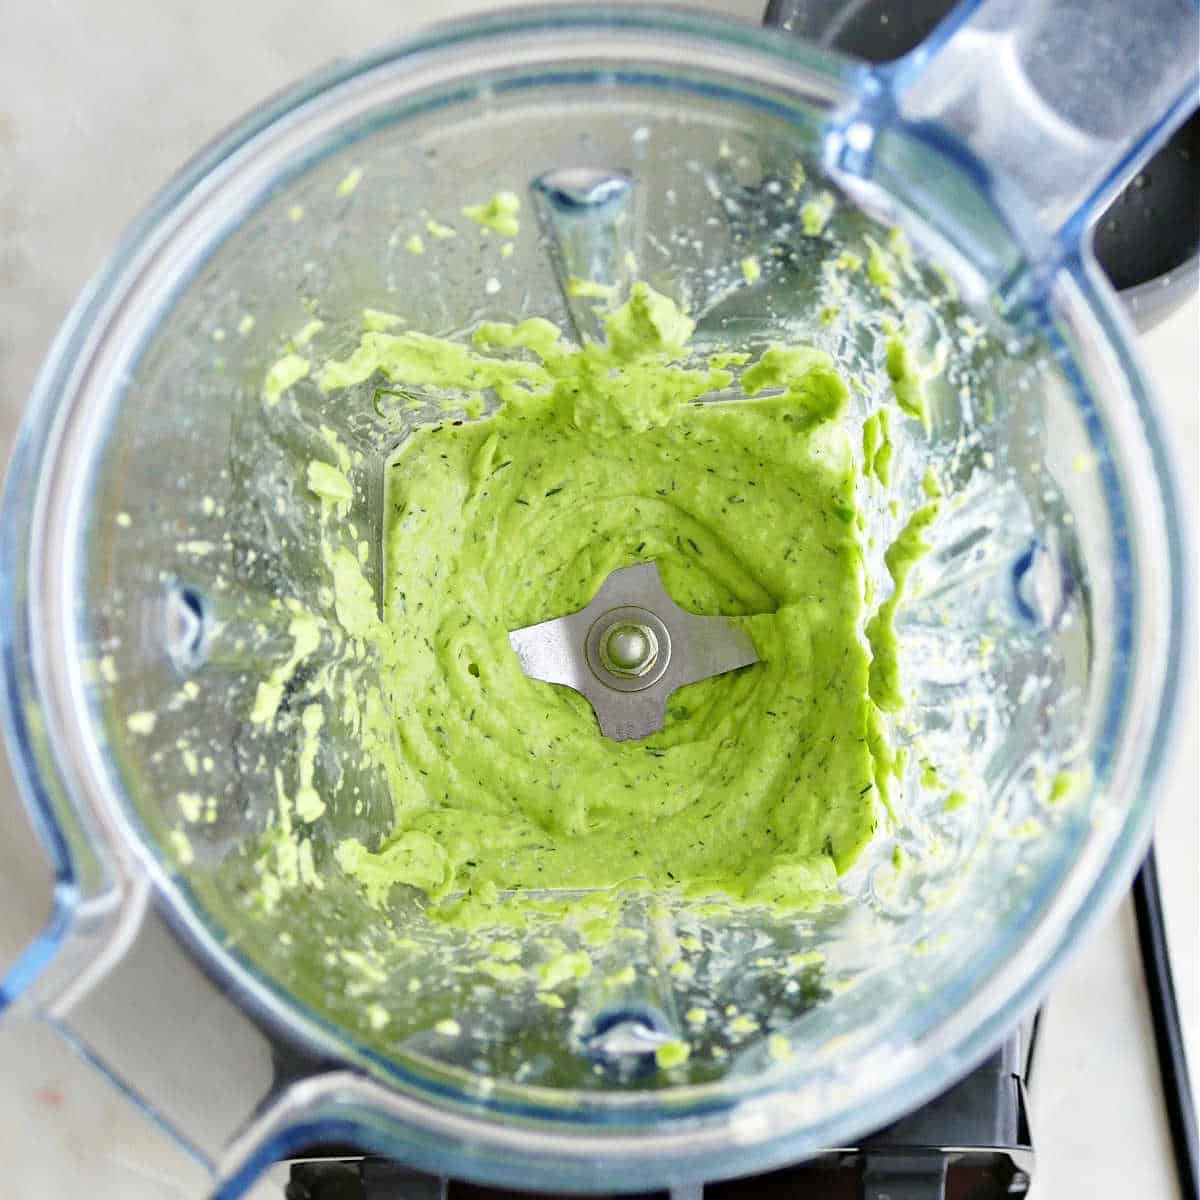 blended fava bean hummus in a blender on a counter